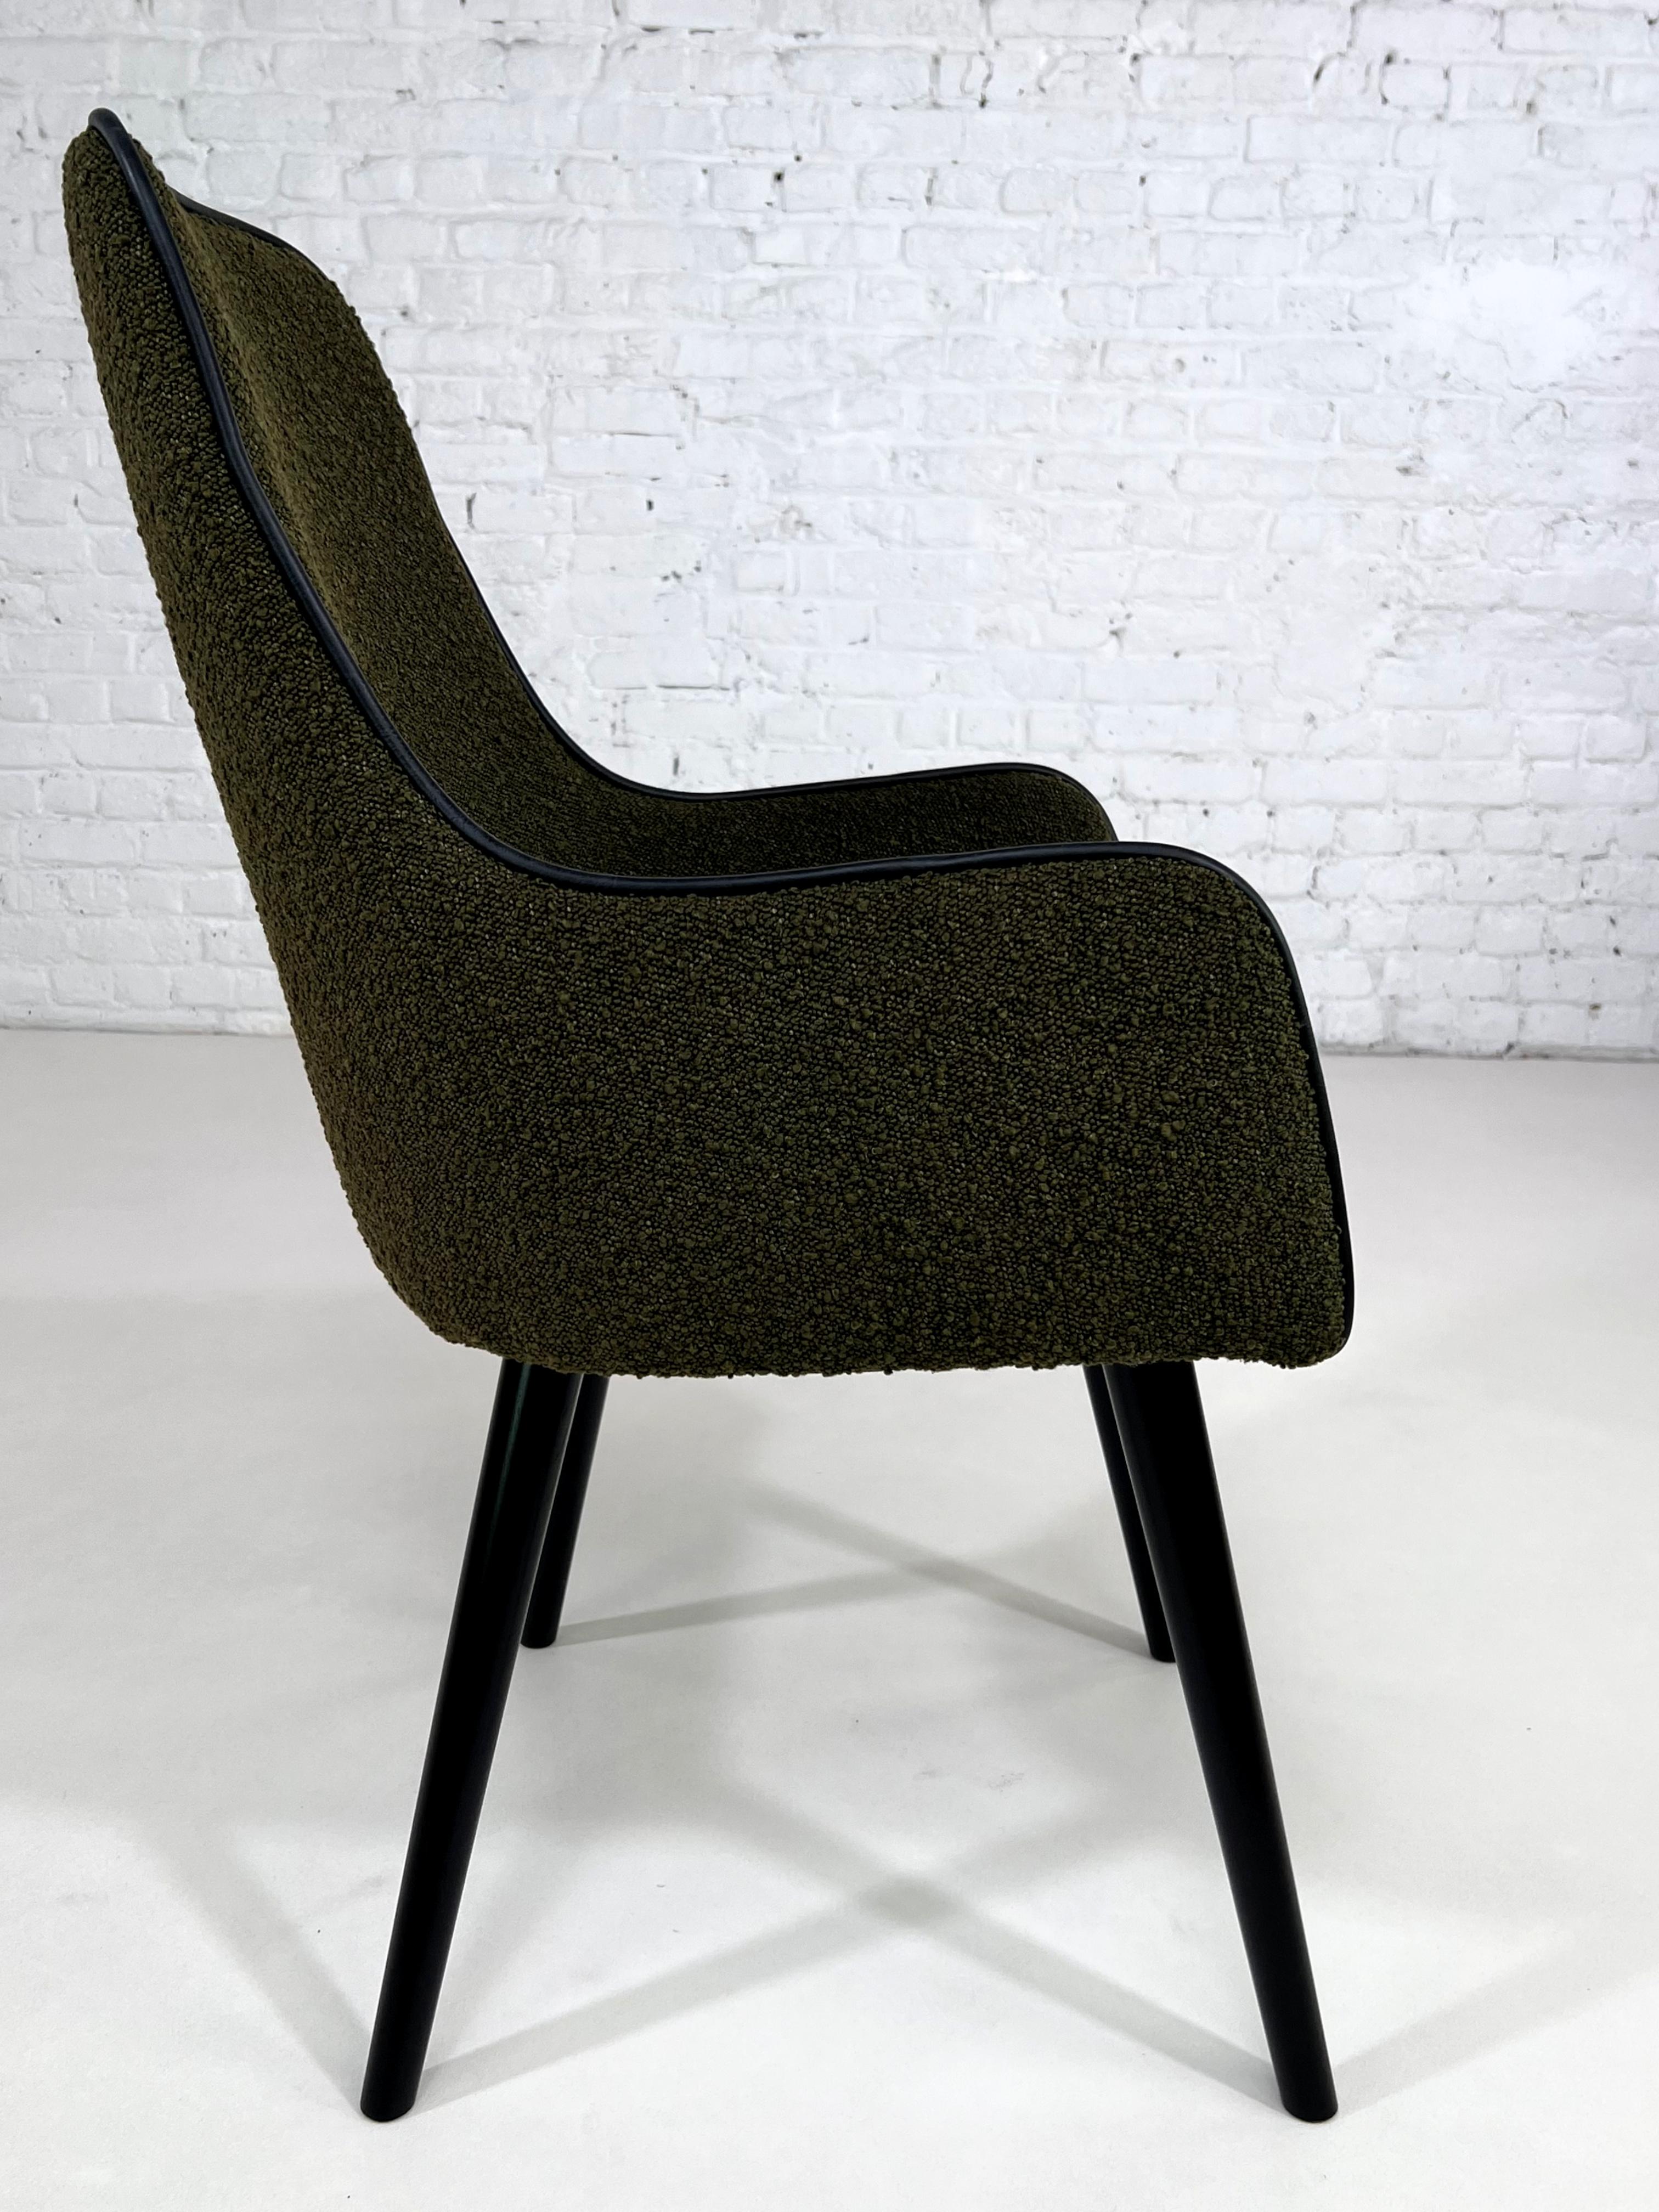 European 1960s MCM Design Style Green Bouclé Fabric and Black Leather Chair For Sale